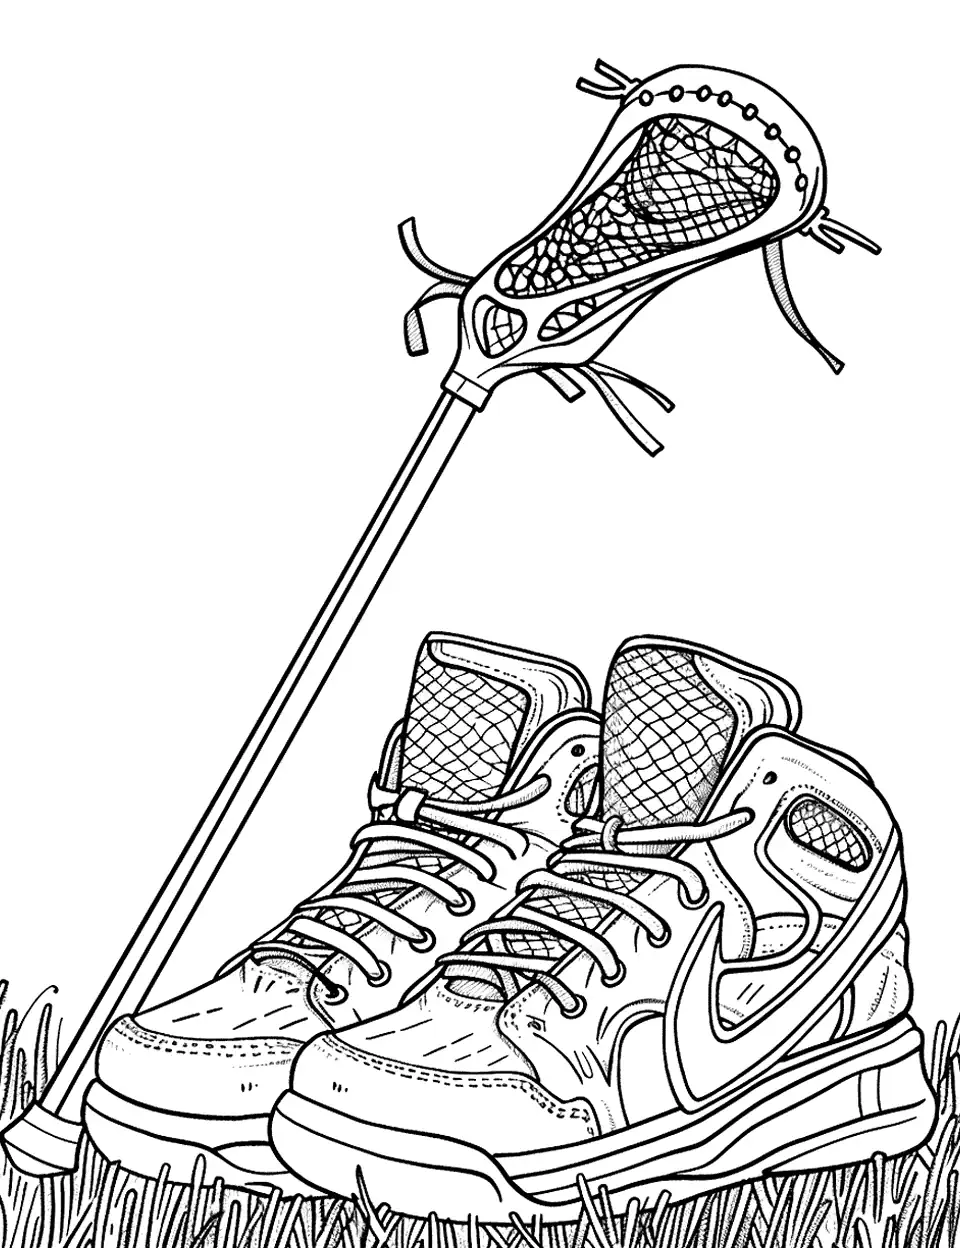 Lacrosse Shoes on the Field Shoe Coloring Page - Lacrosse shoes with a lacrosse stick on a grassy field.